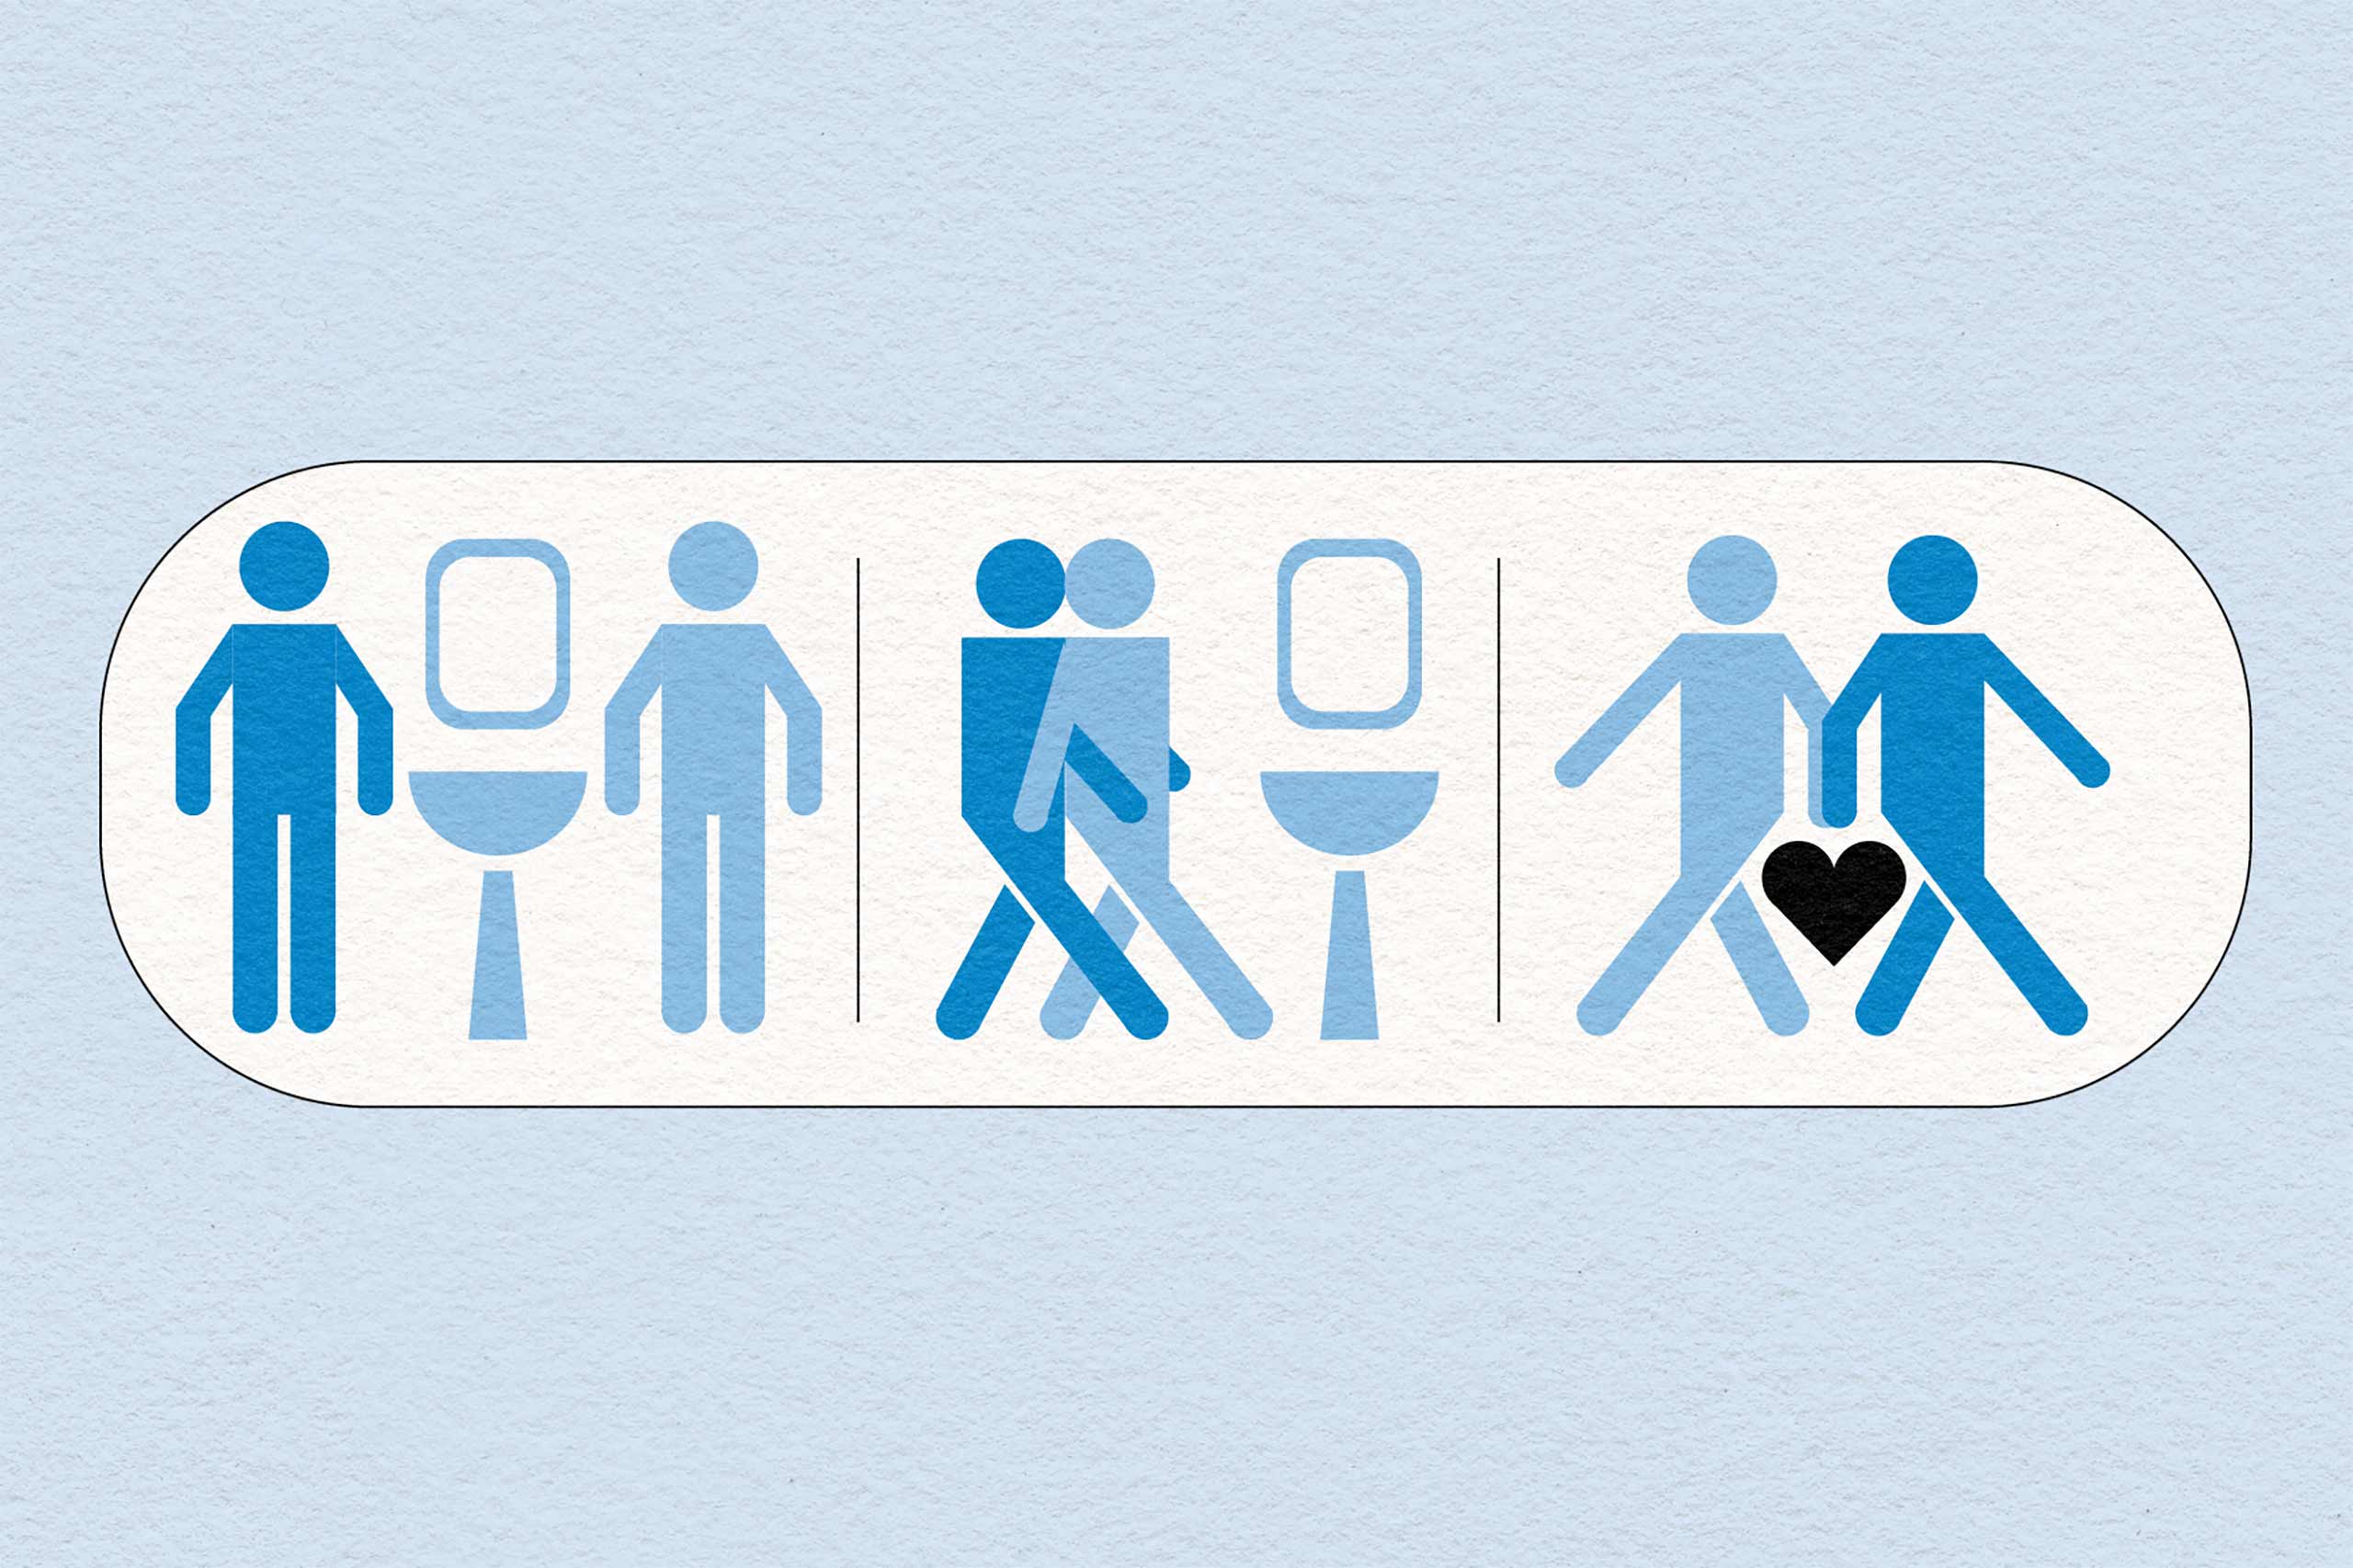 Illustration of passengers on a plane having sex, The Mile High Club